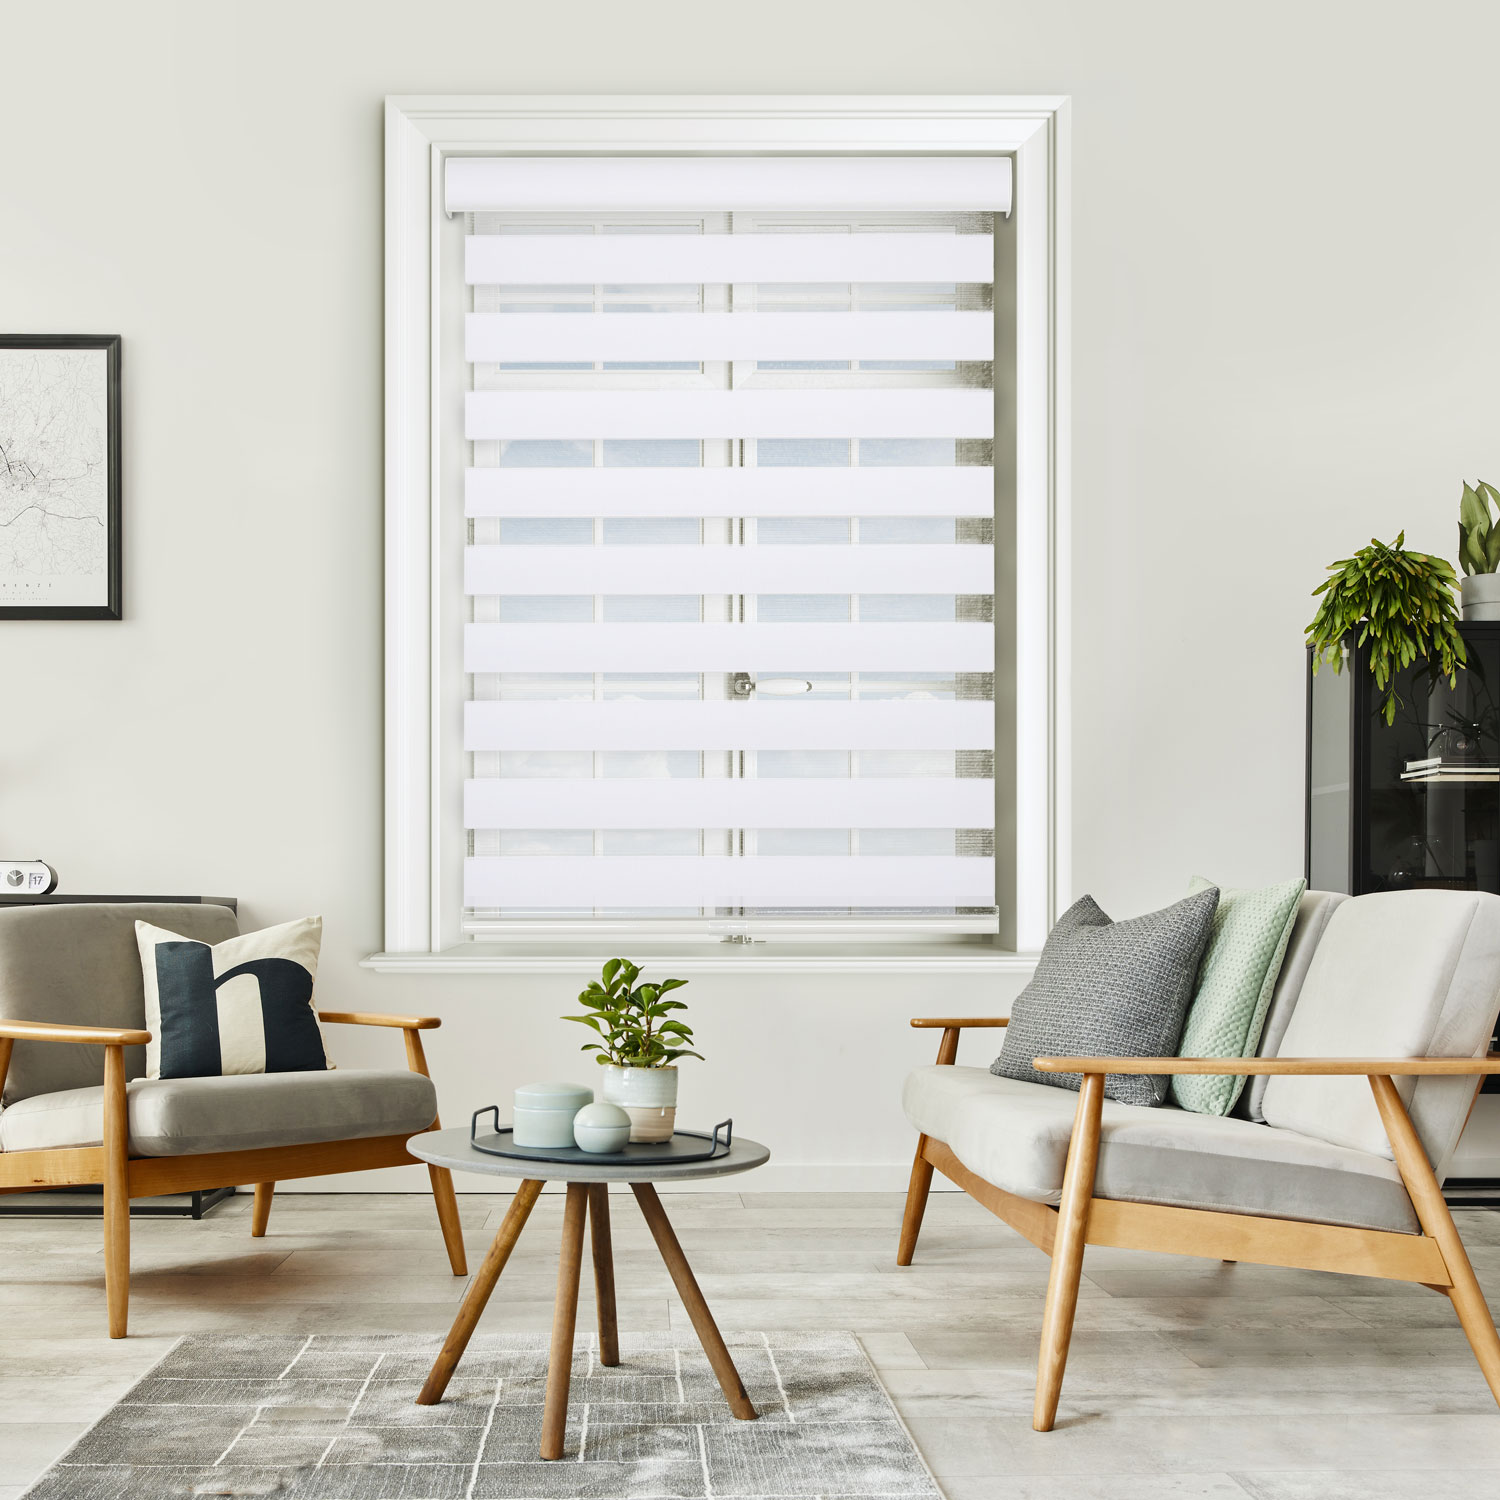 35"x72" Cordless Window Roller Shades Free-Stop Dual Layer Zebra Blinds 